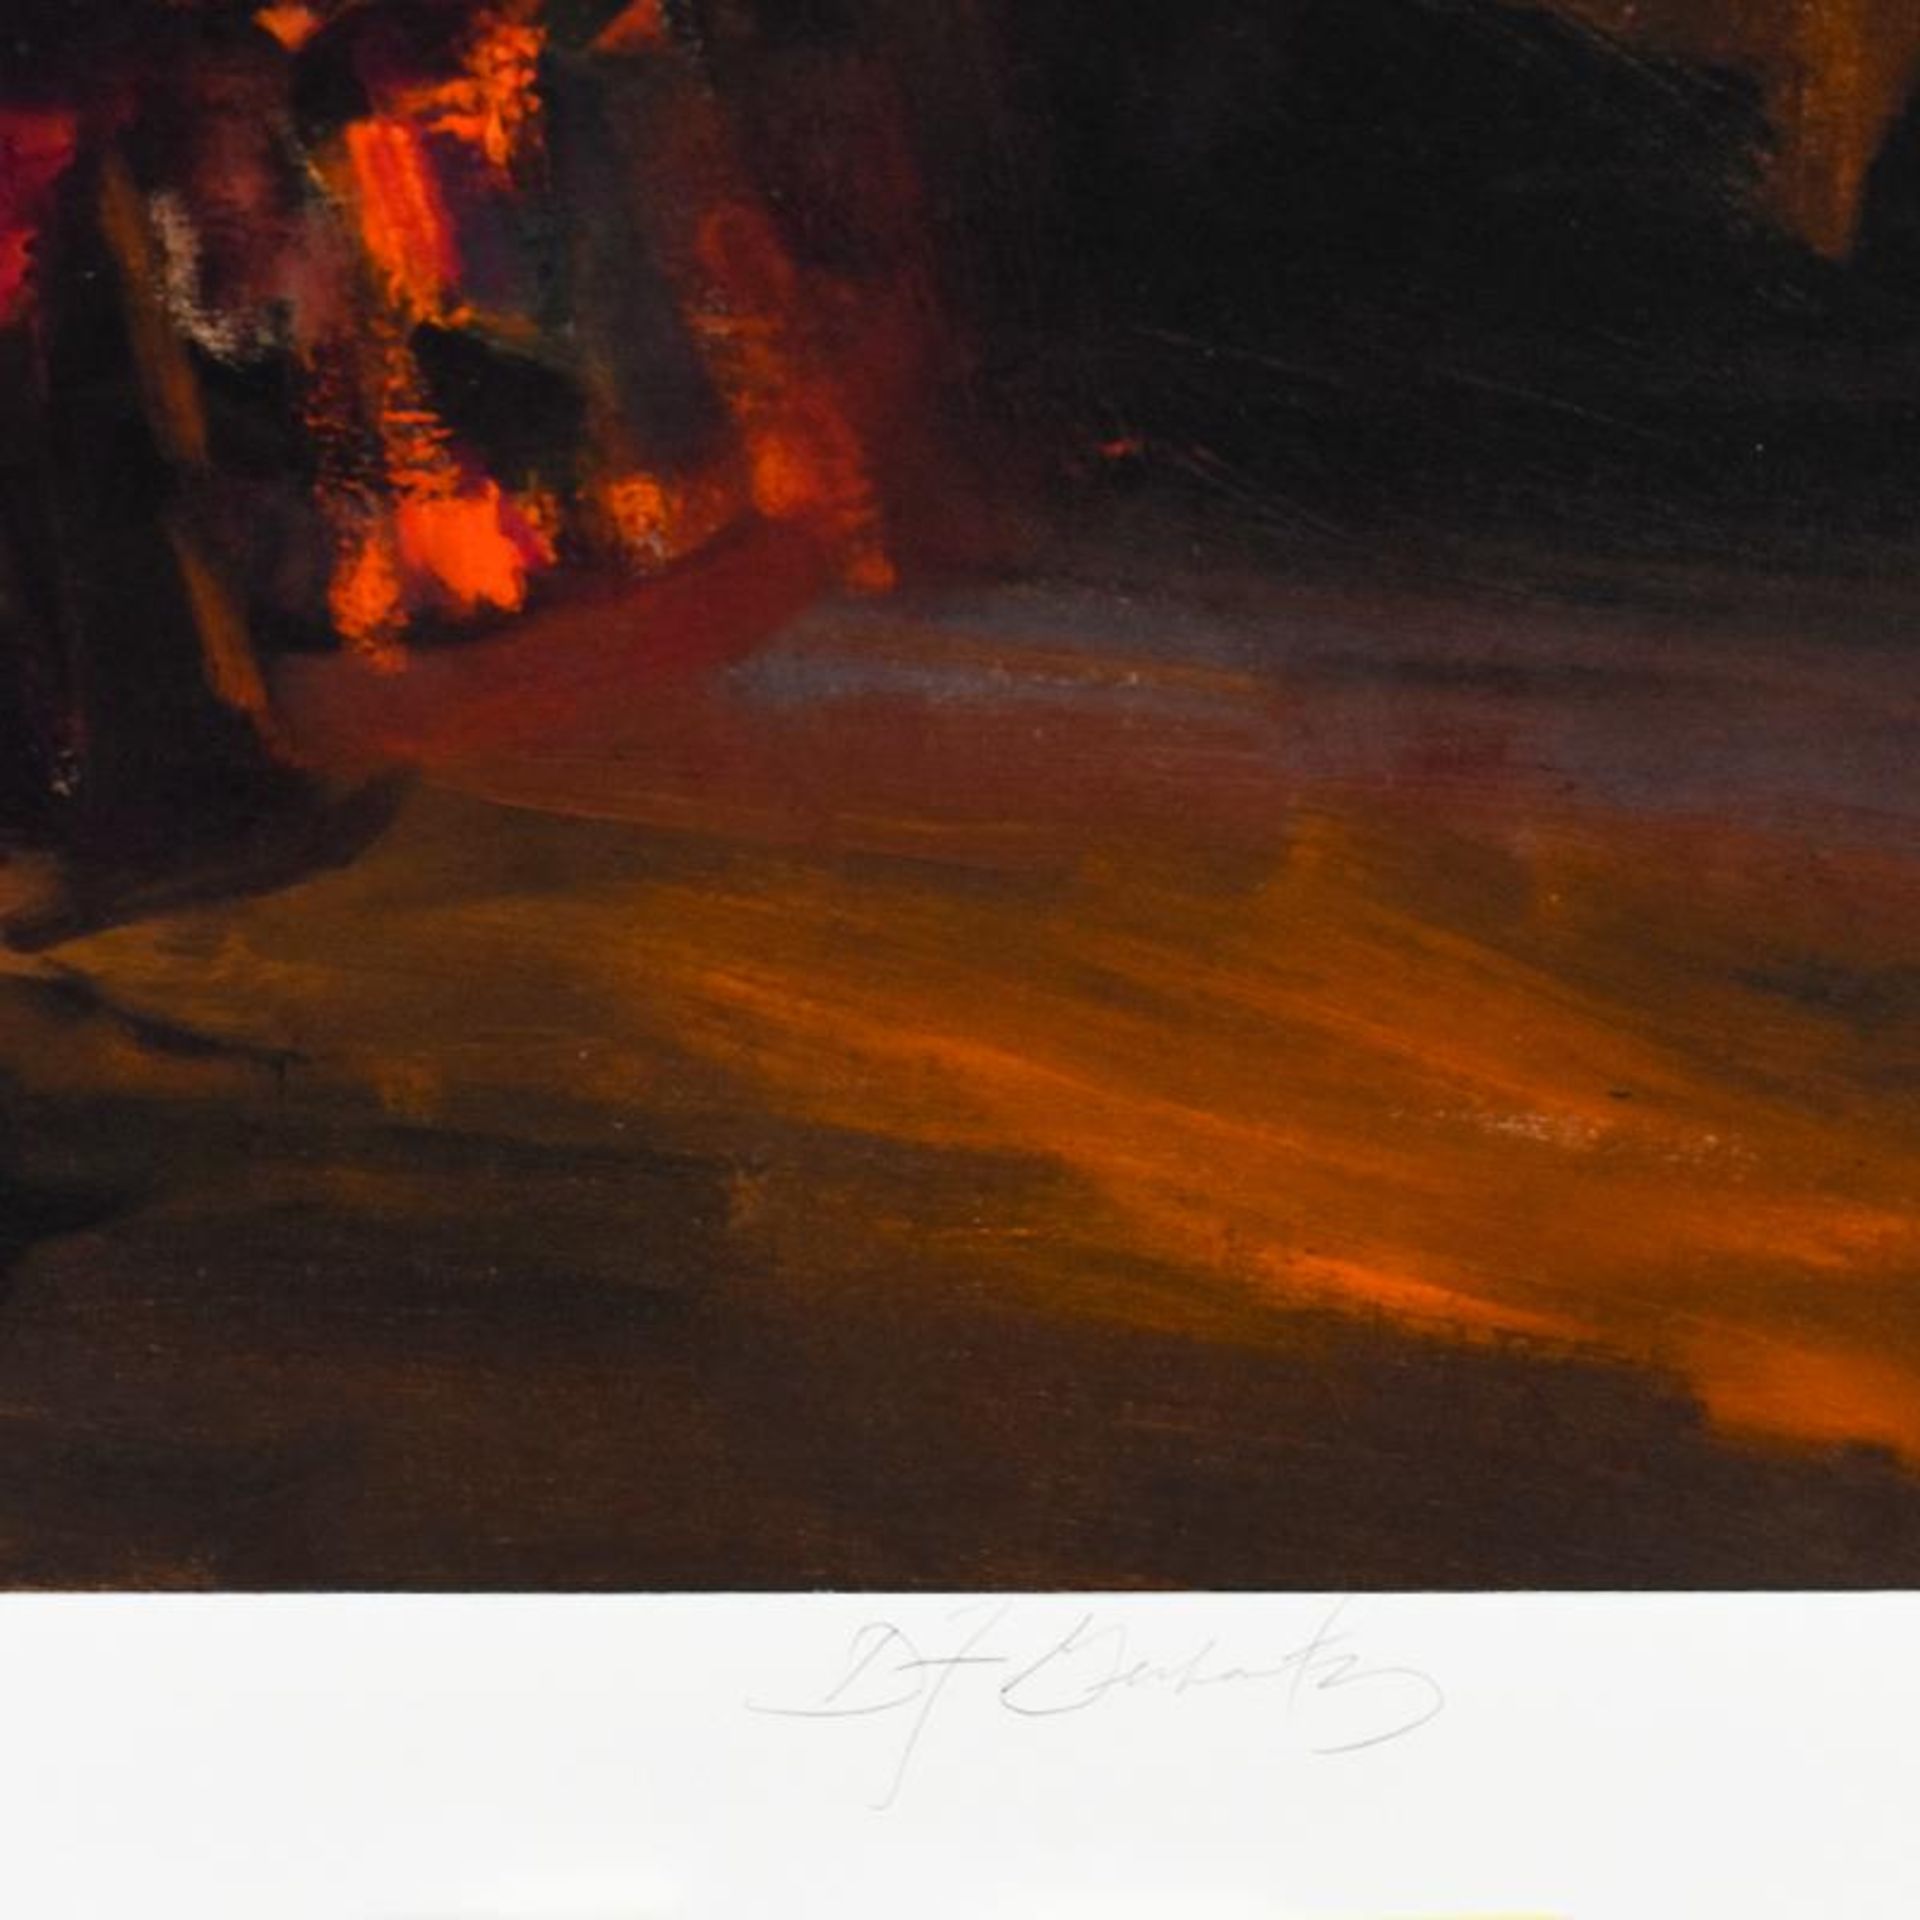 Dan Gerhartz, "Viva Flamenco" Limited Edition, Numbered and Hand Signed with Let - Image 2 of 2